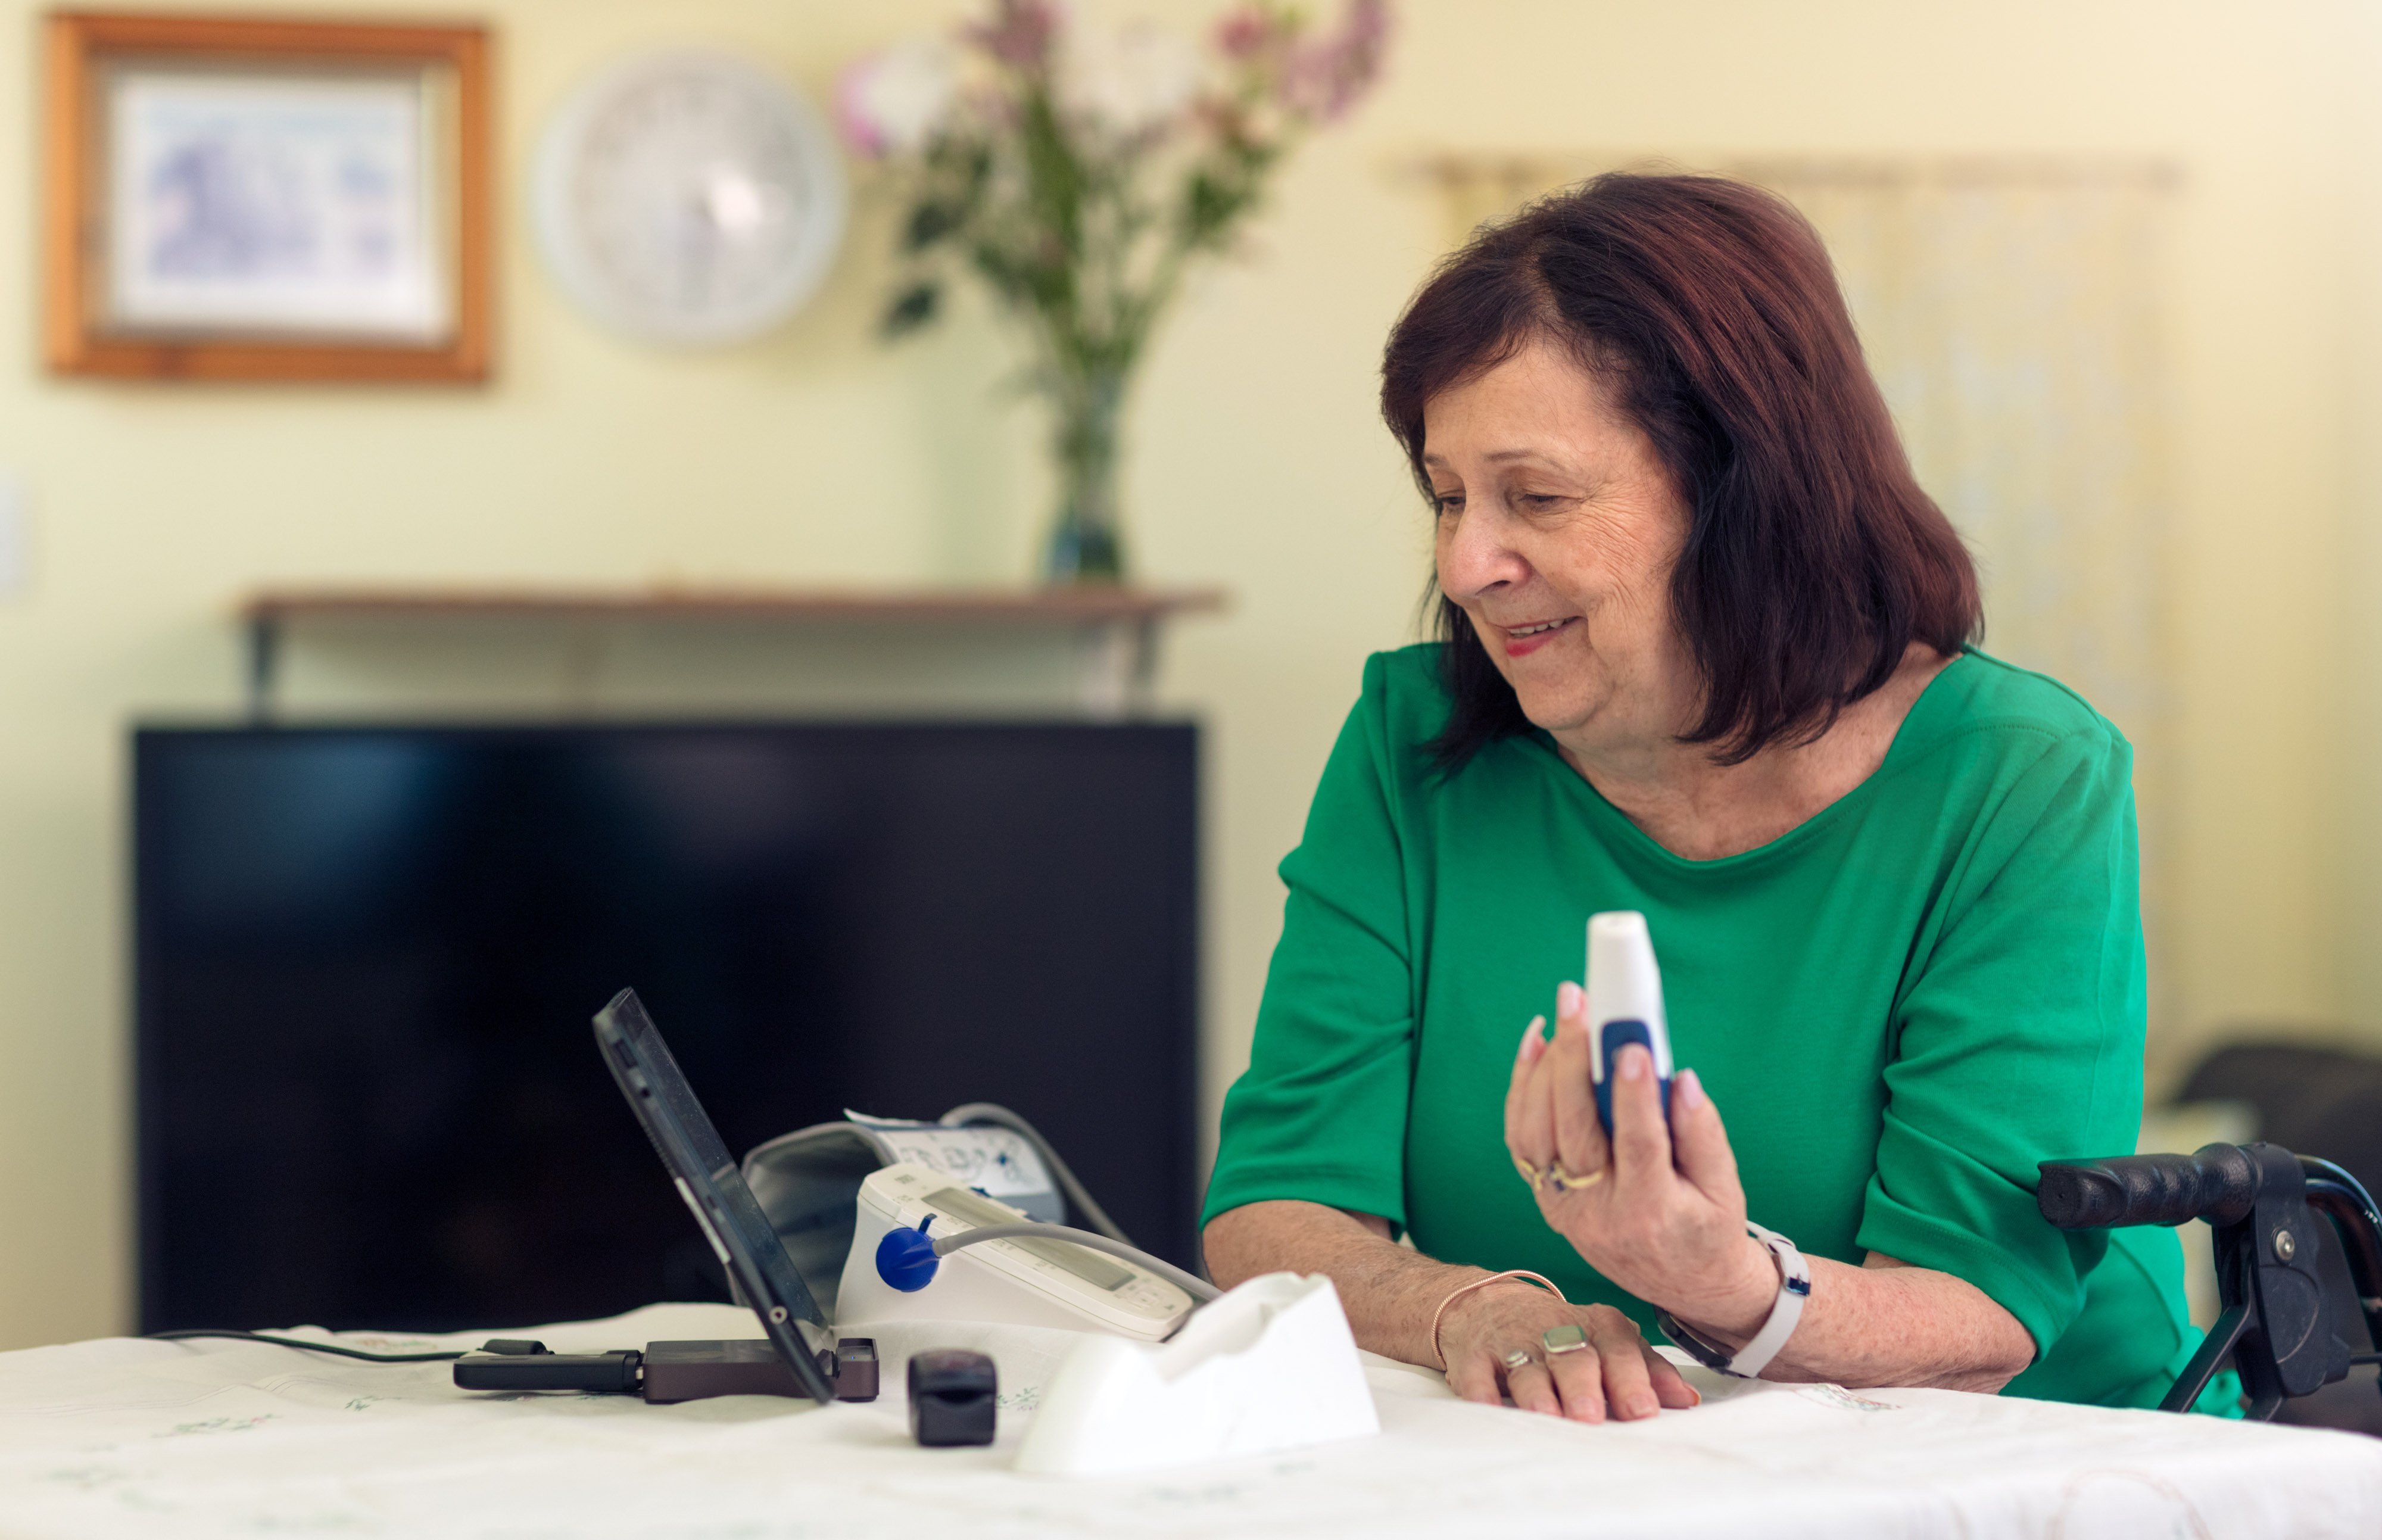 Senior lady using pulse oximeter at a table